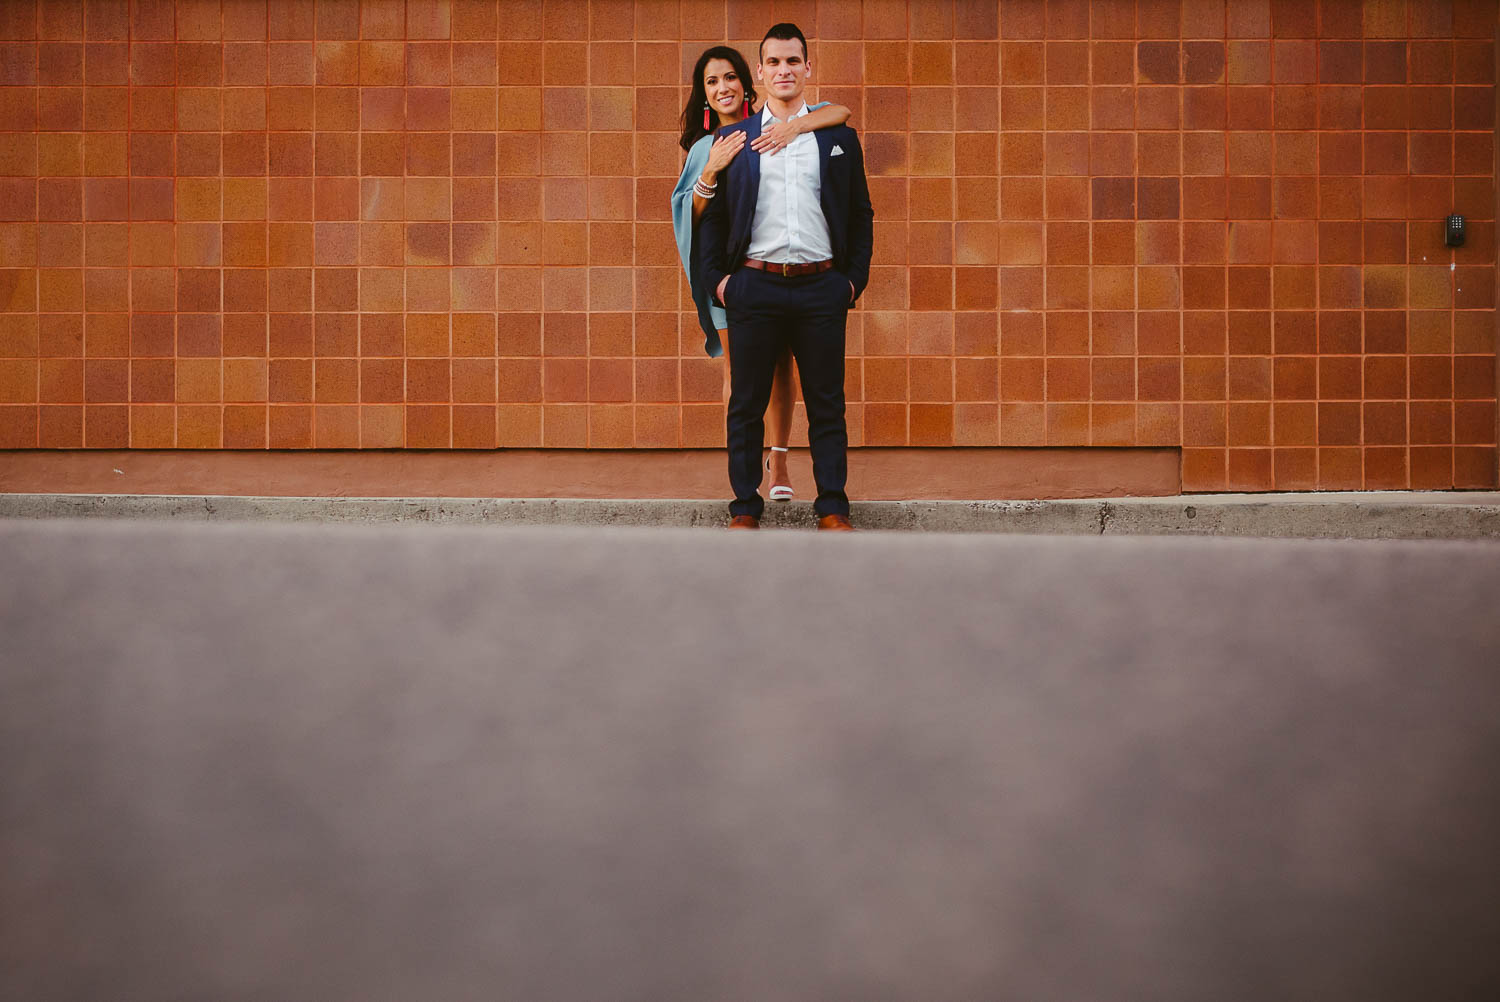 Downtown central library San Antonio Engagement photos-09